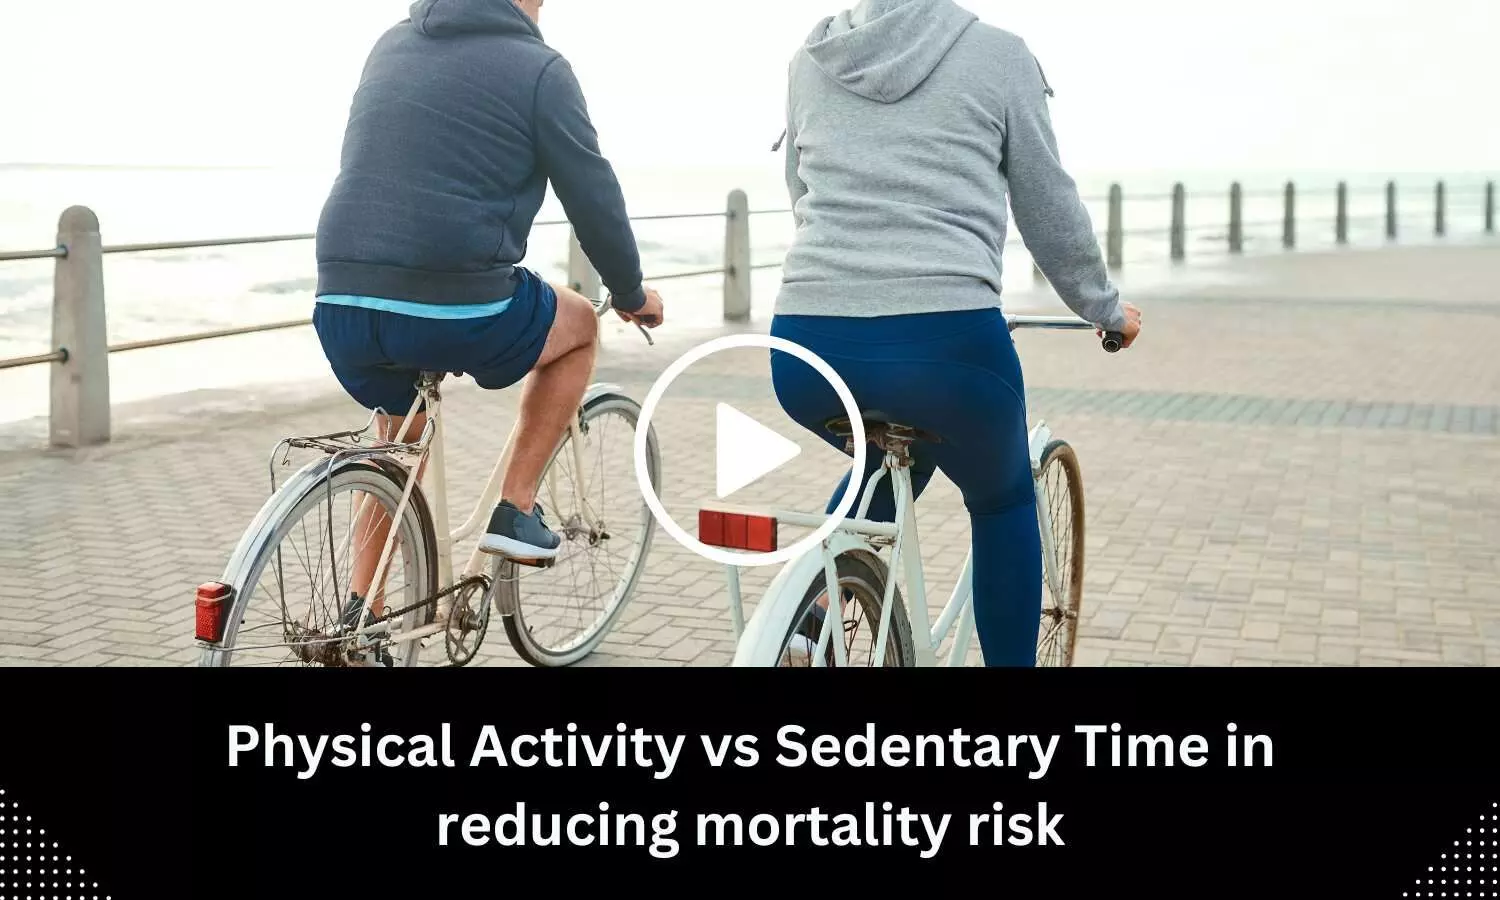 Physical Activity vs Sedentary Time in reducing mortality risk